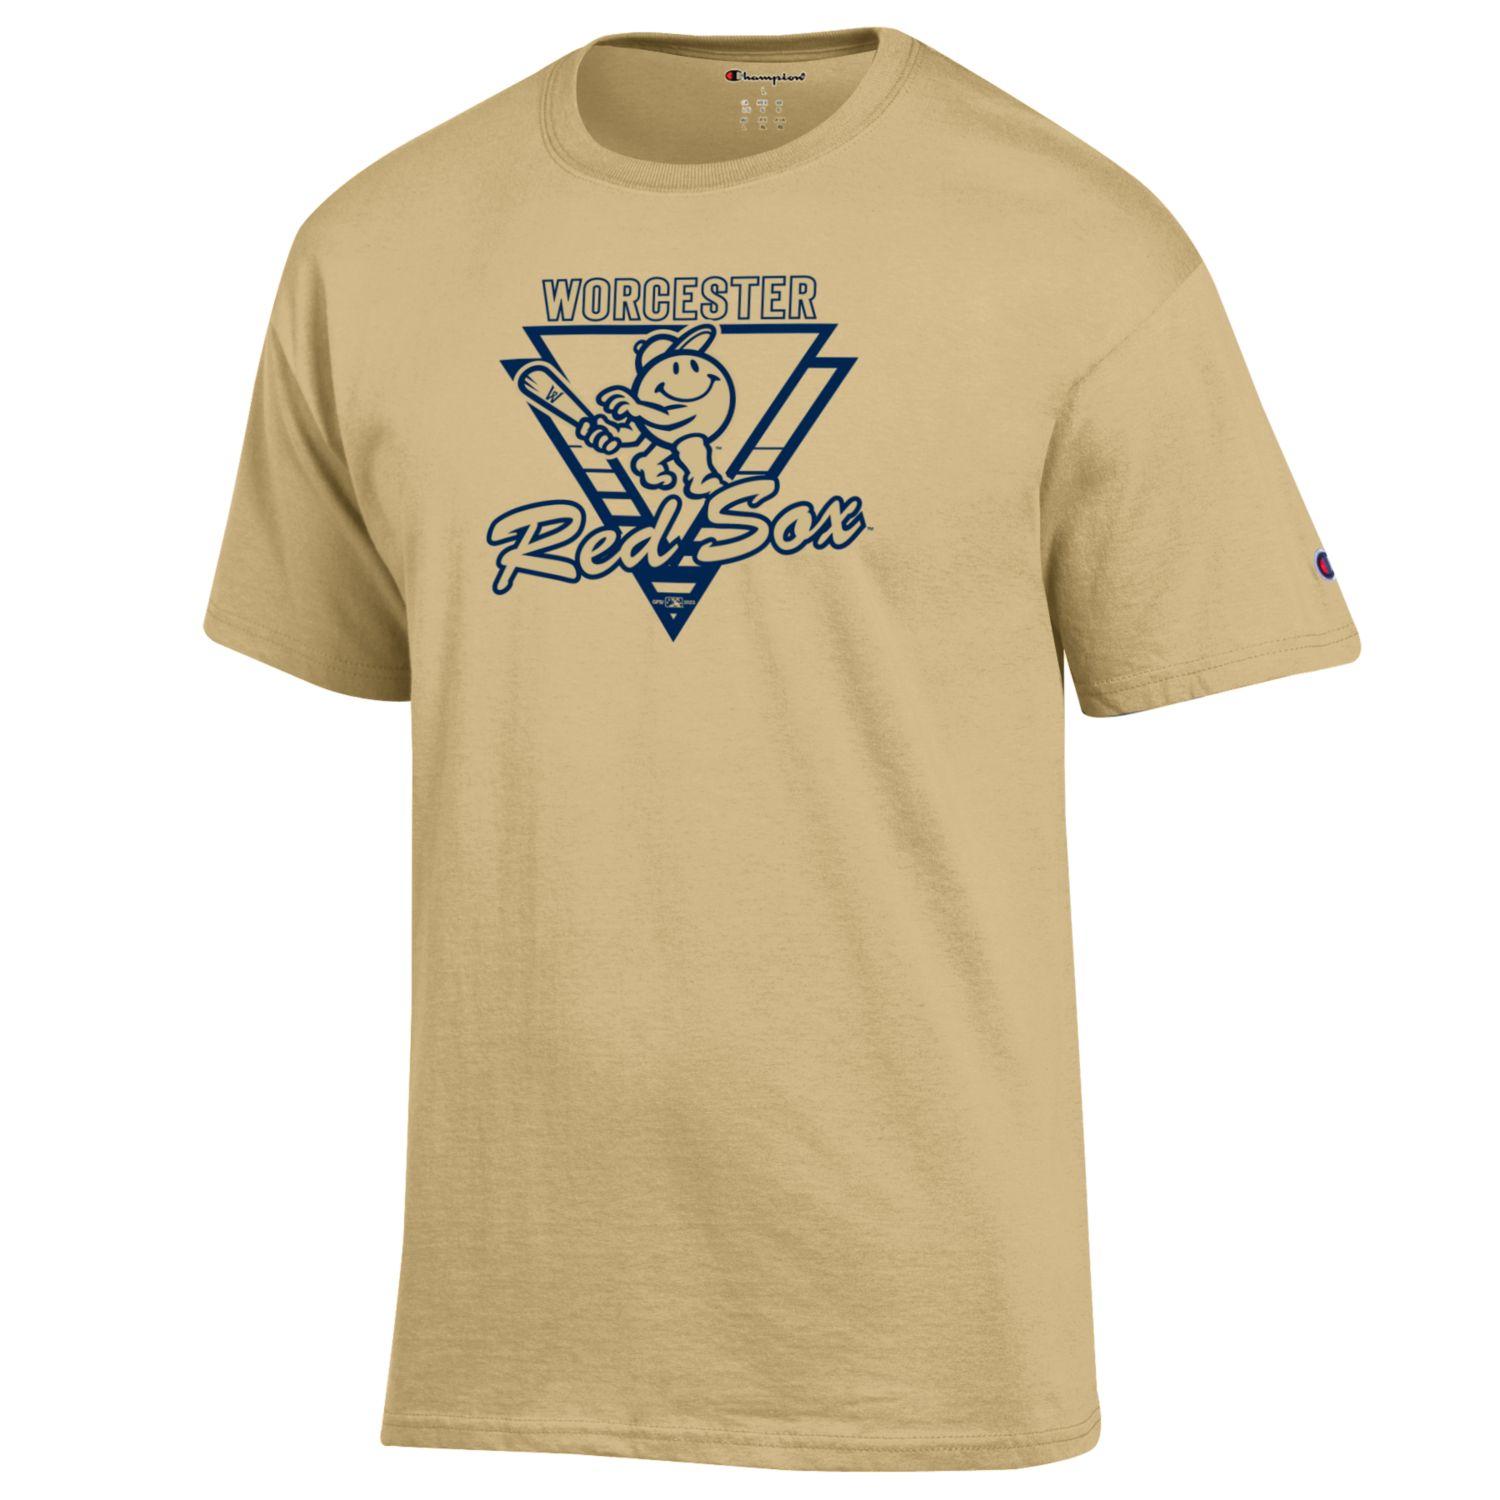 Worcester Red Sox Champion Gold Triangles Smiley Tee 3X